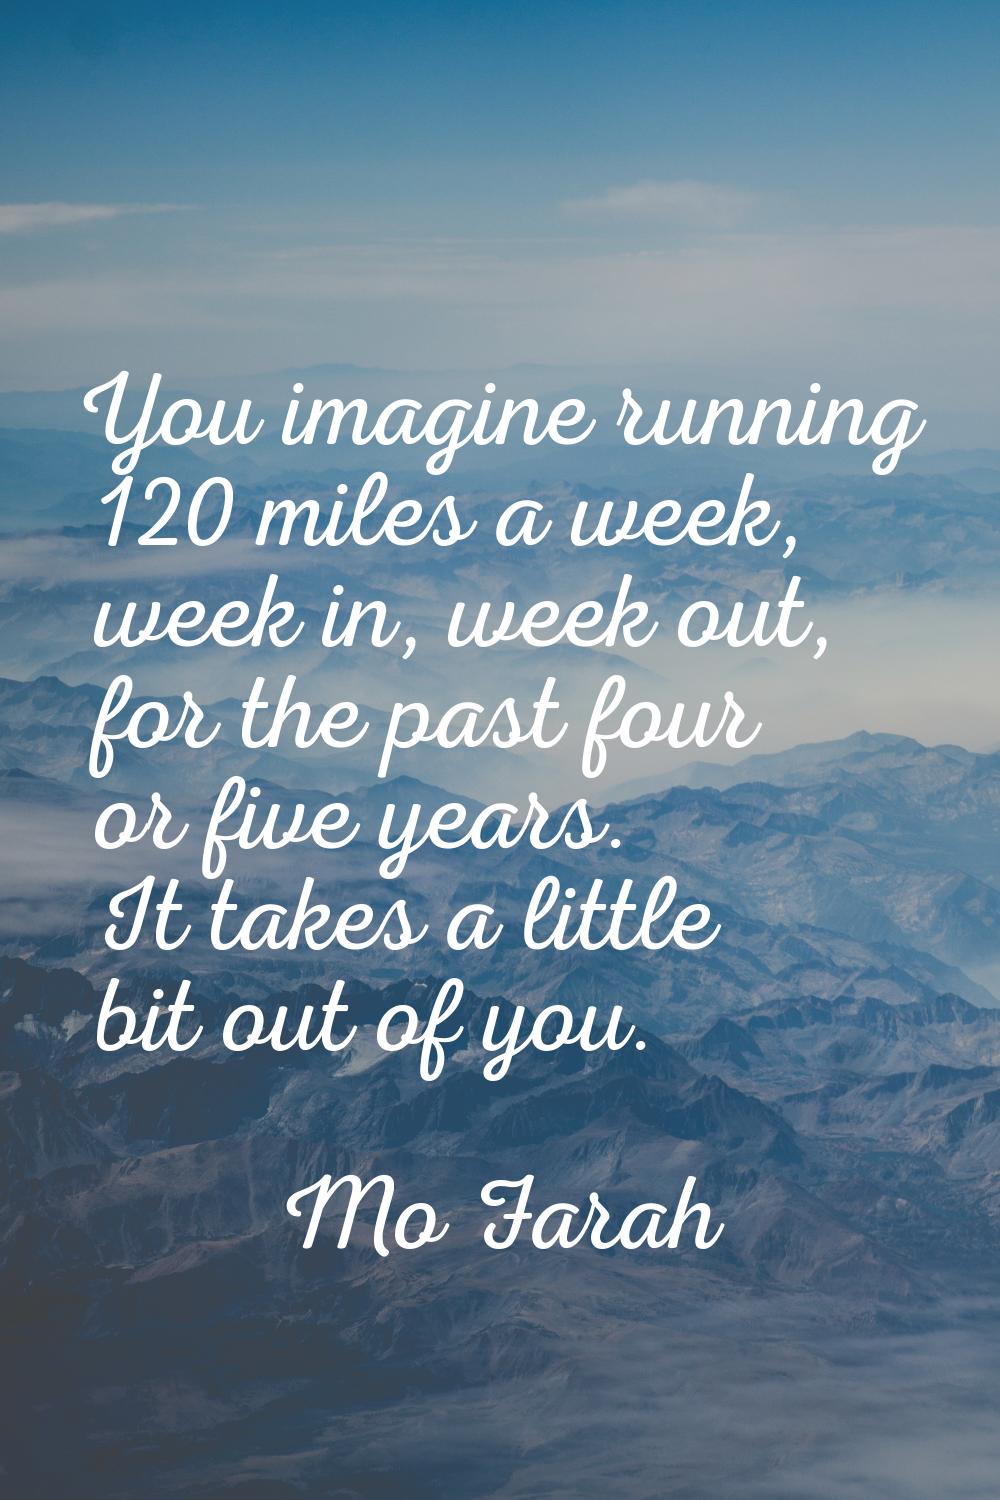 You imagine running 120 miles a week, week in, week out, for the past four or five years. It takes 